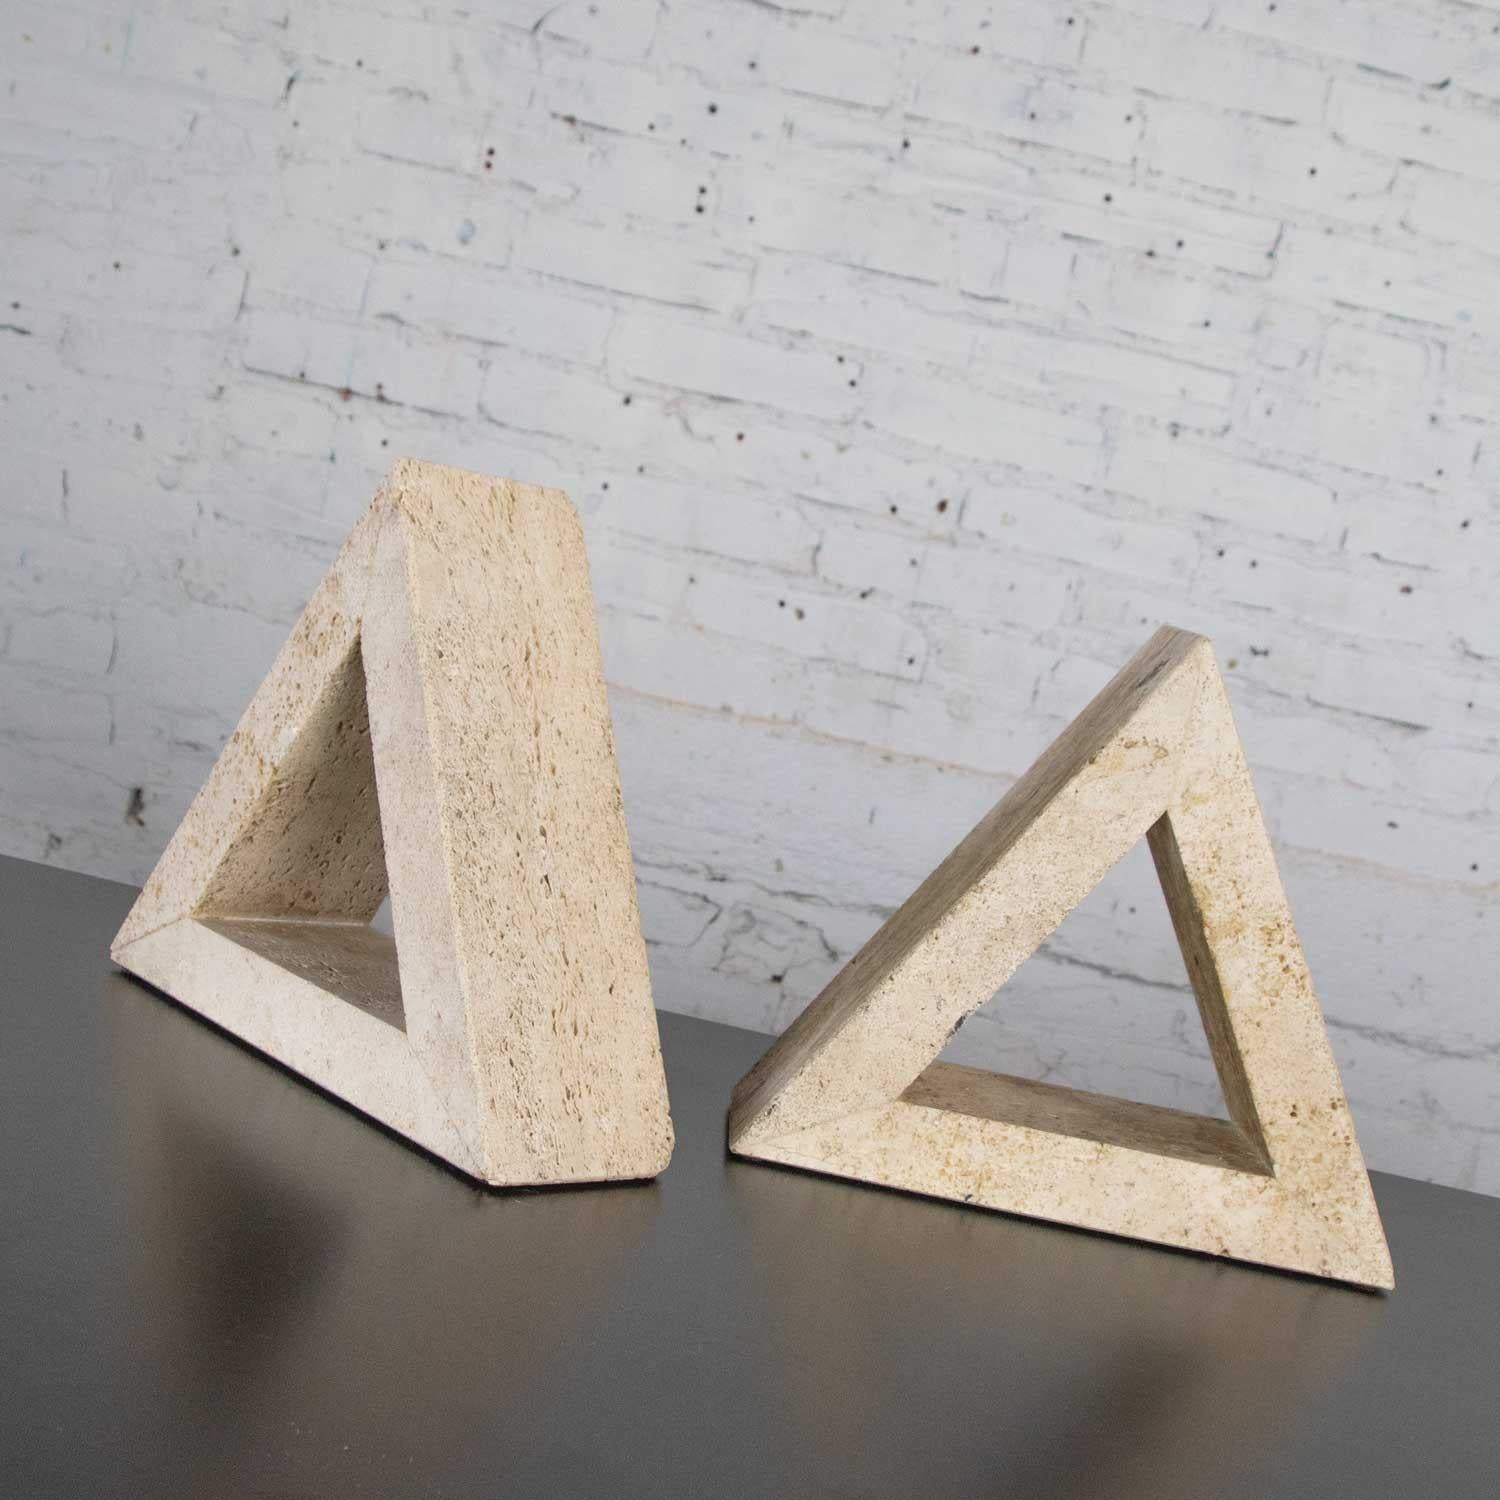 Fabulous modern delta shaped pair of solid unfilled travertine book ends attributed to Fratelli Mannelli for Raymor. In wonderful vintage condition with a few nicks on the corners from use. Please see photos, circa late 20th century.

Splendid in